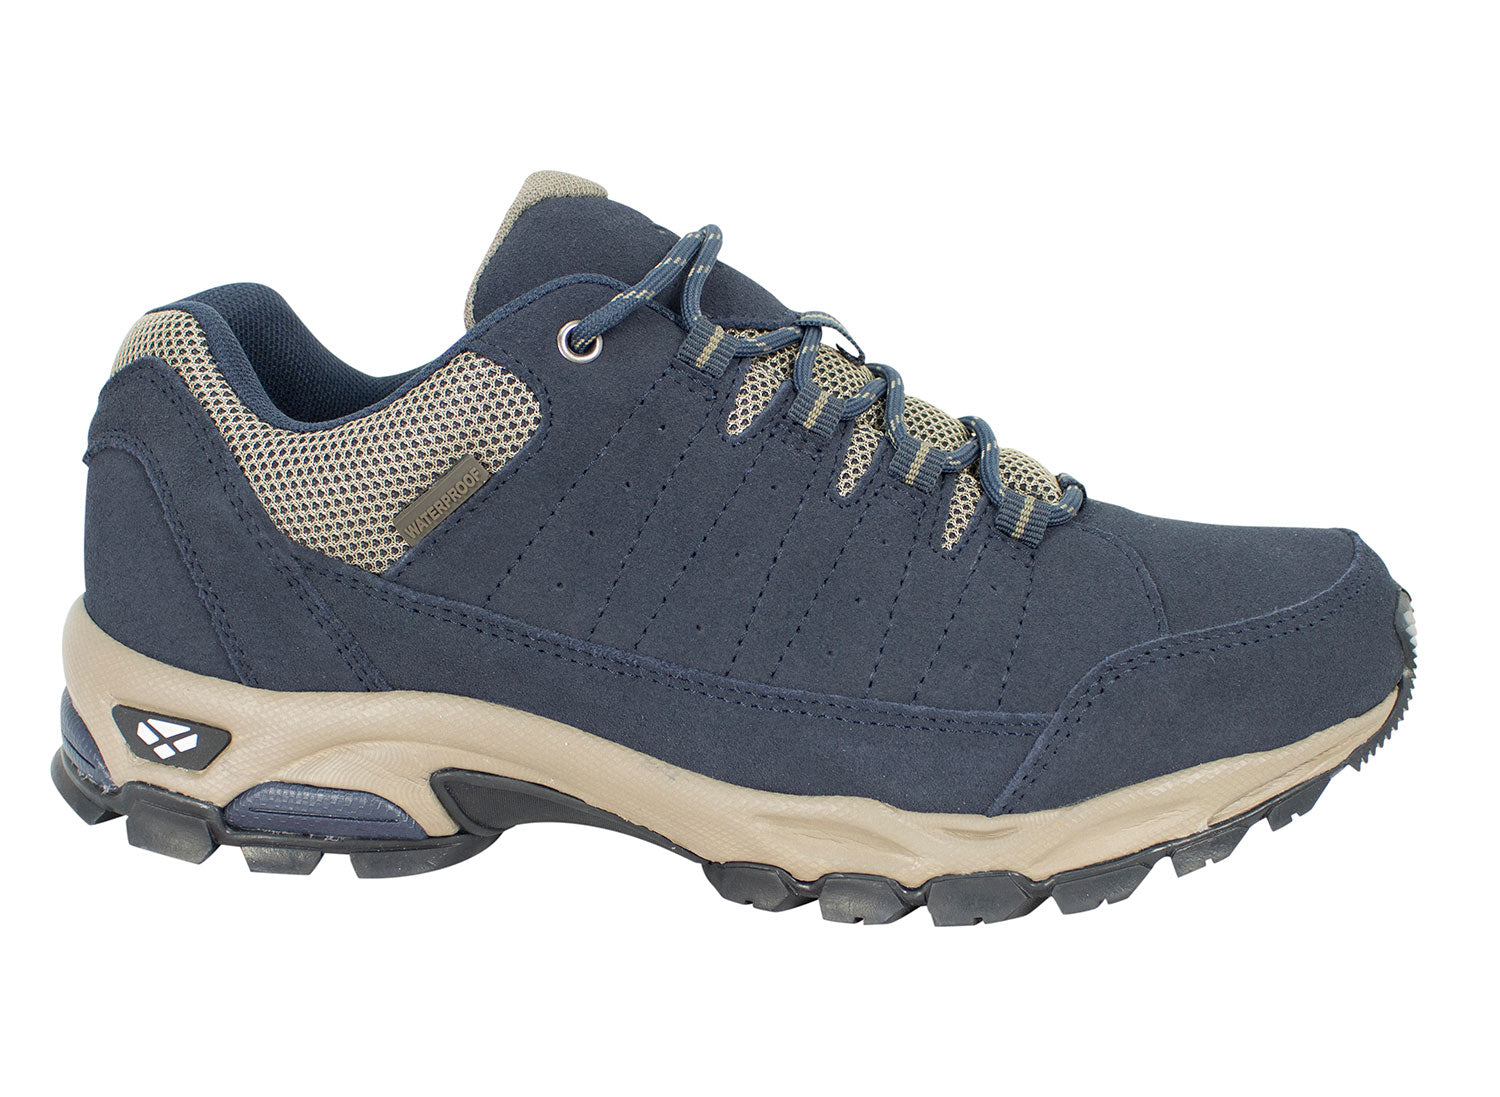 Navy Hoggs of Fife Cairn Pro Waterproof Hiking Shoes 